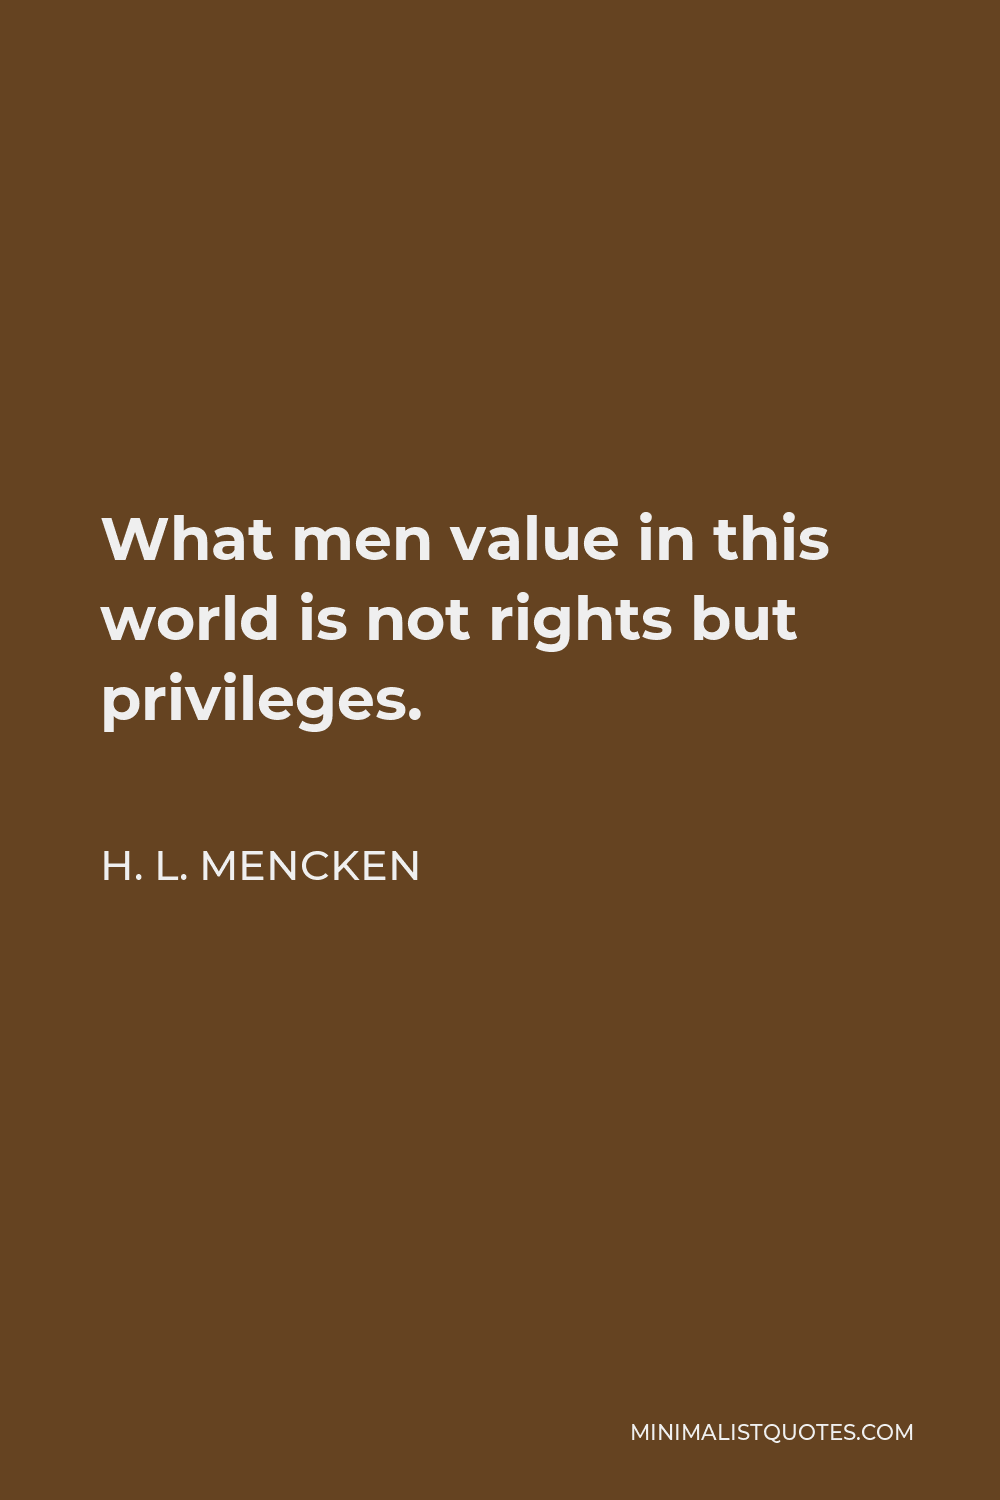 H. L. Mencken Quote - What men value in this world is not rights but privileges.